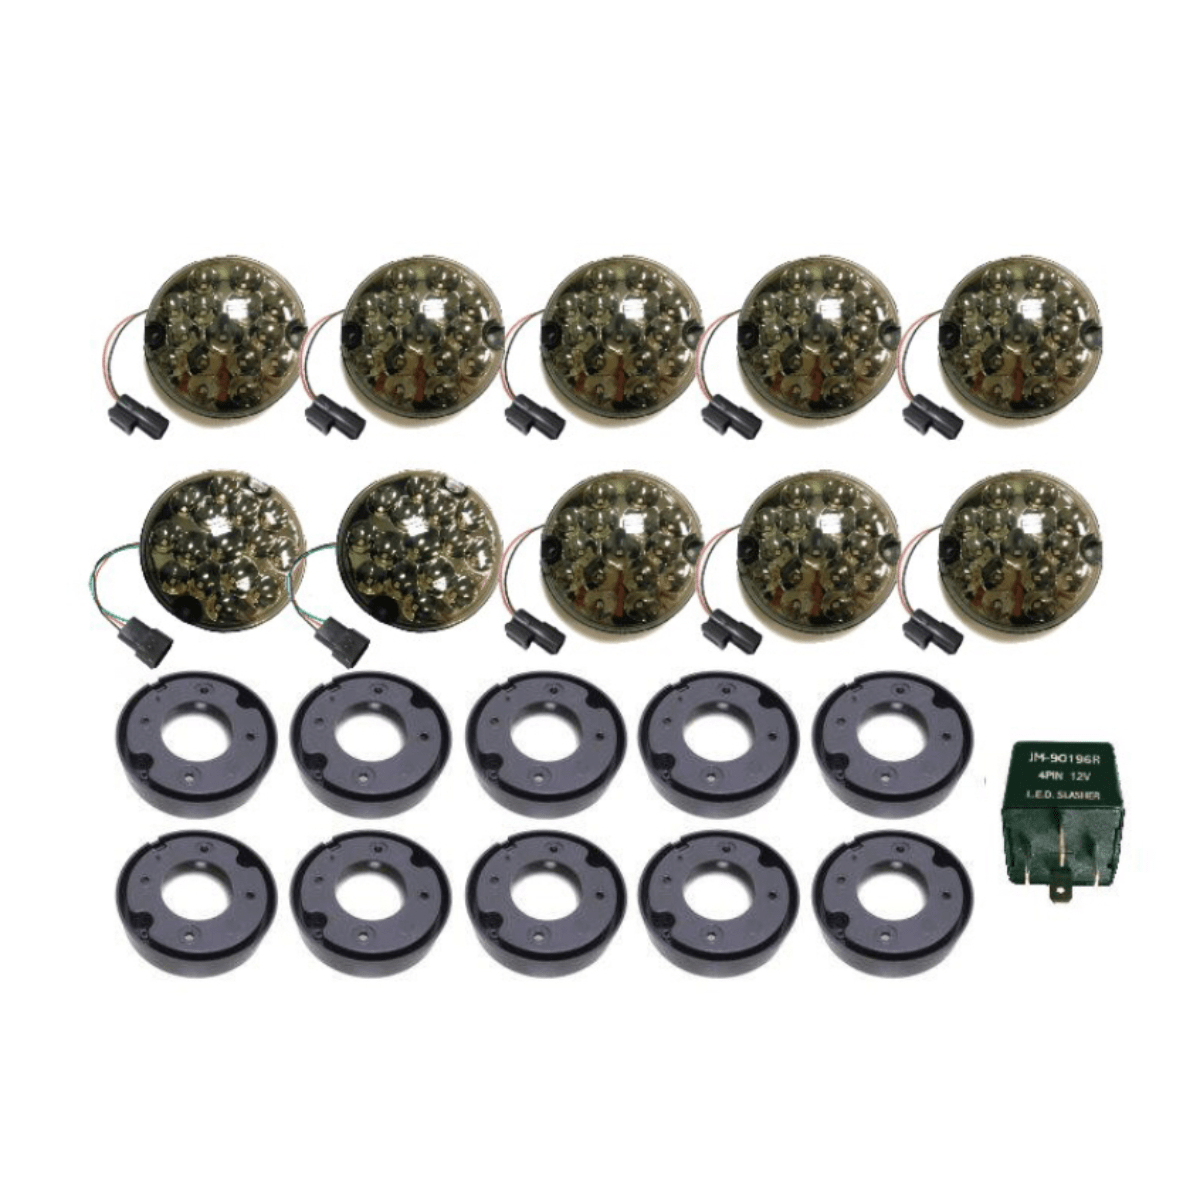 Land Rover Defender Smoke 95mm LED Light 10PC KIT - Defender Upgrades  Malaysia - Accessories, Parts, Customisation, Wheels